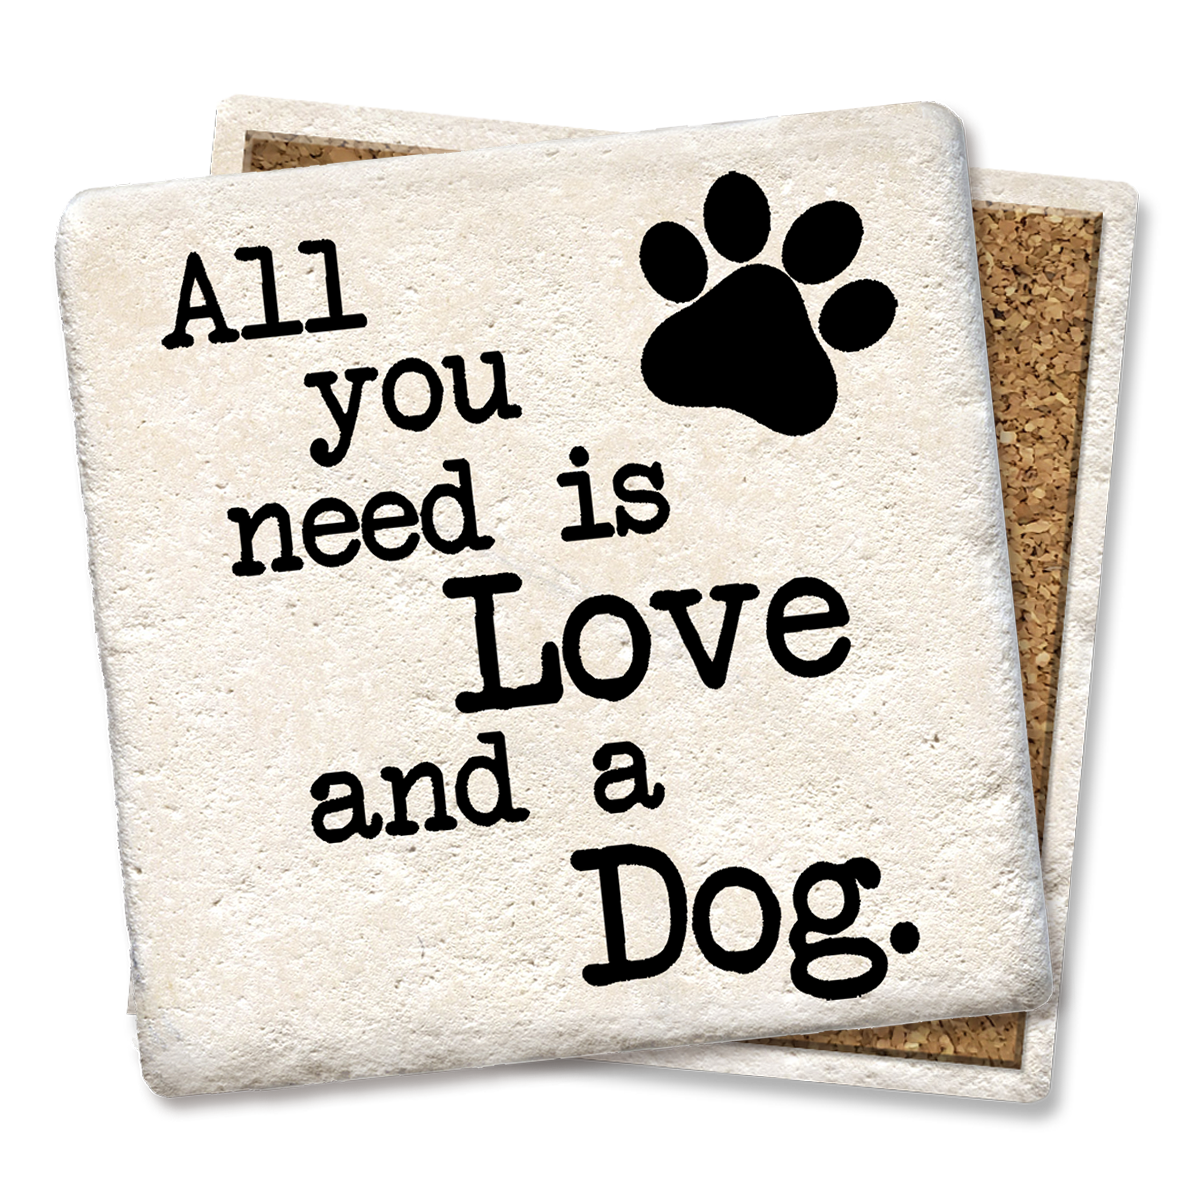 Drink Coaster All You Need Is Love and a Dog  Tipsy Coasters & Gifts   